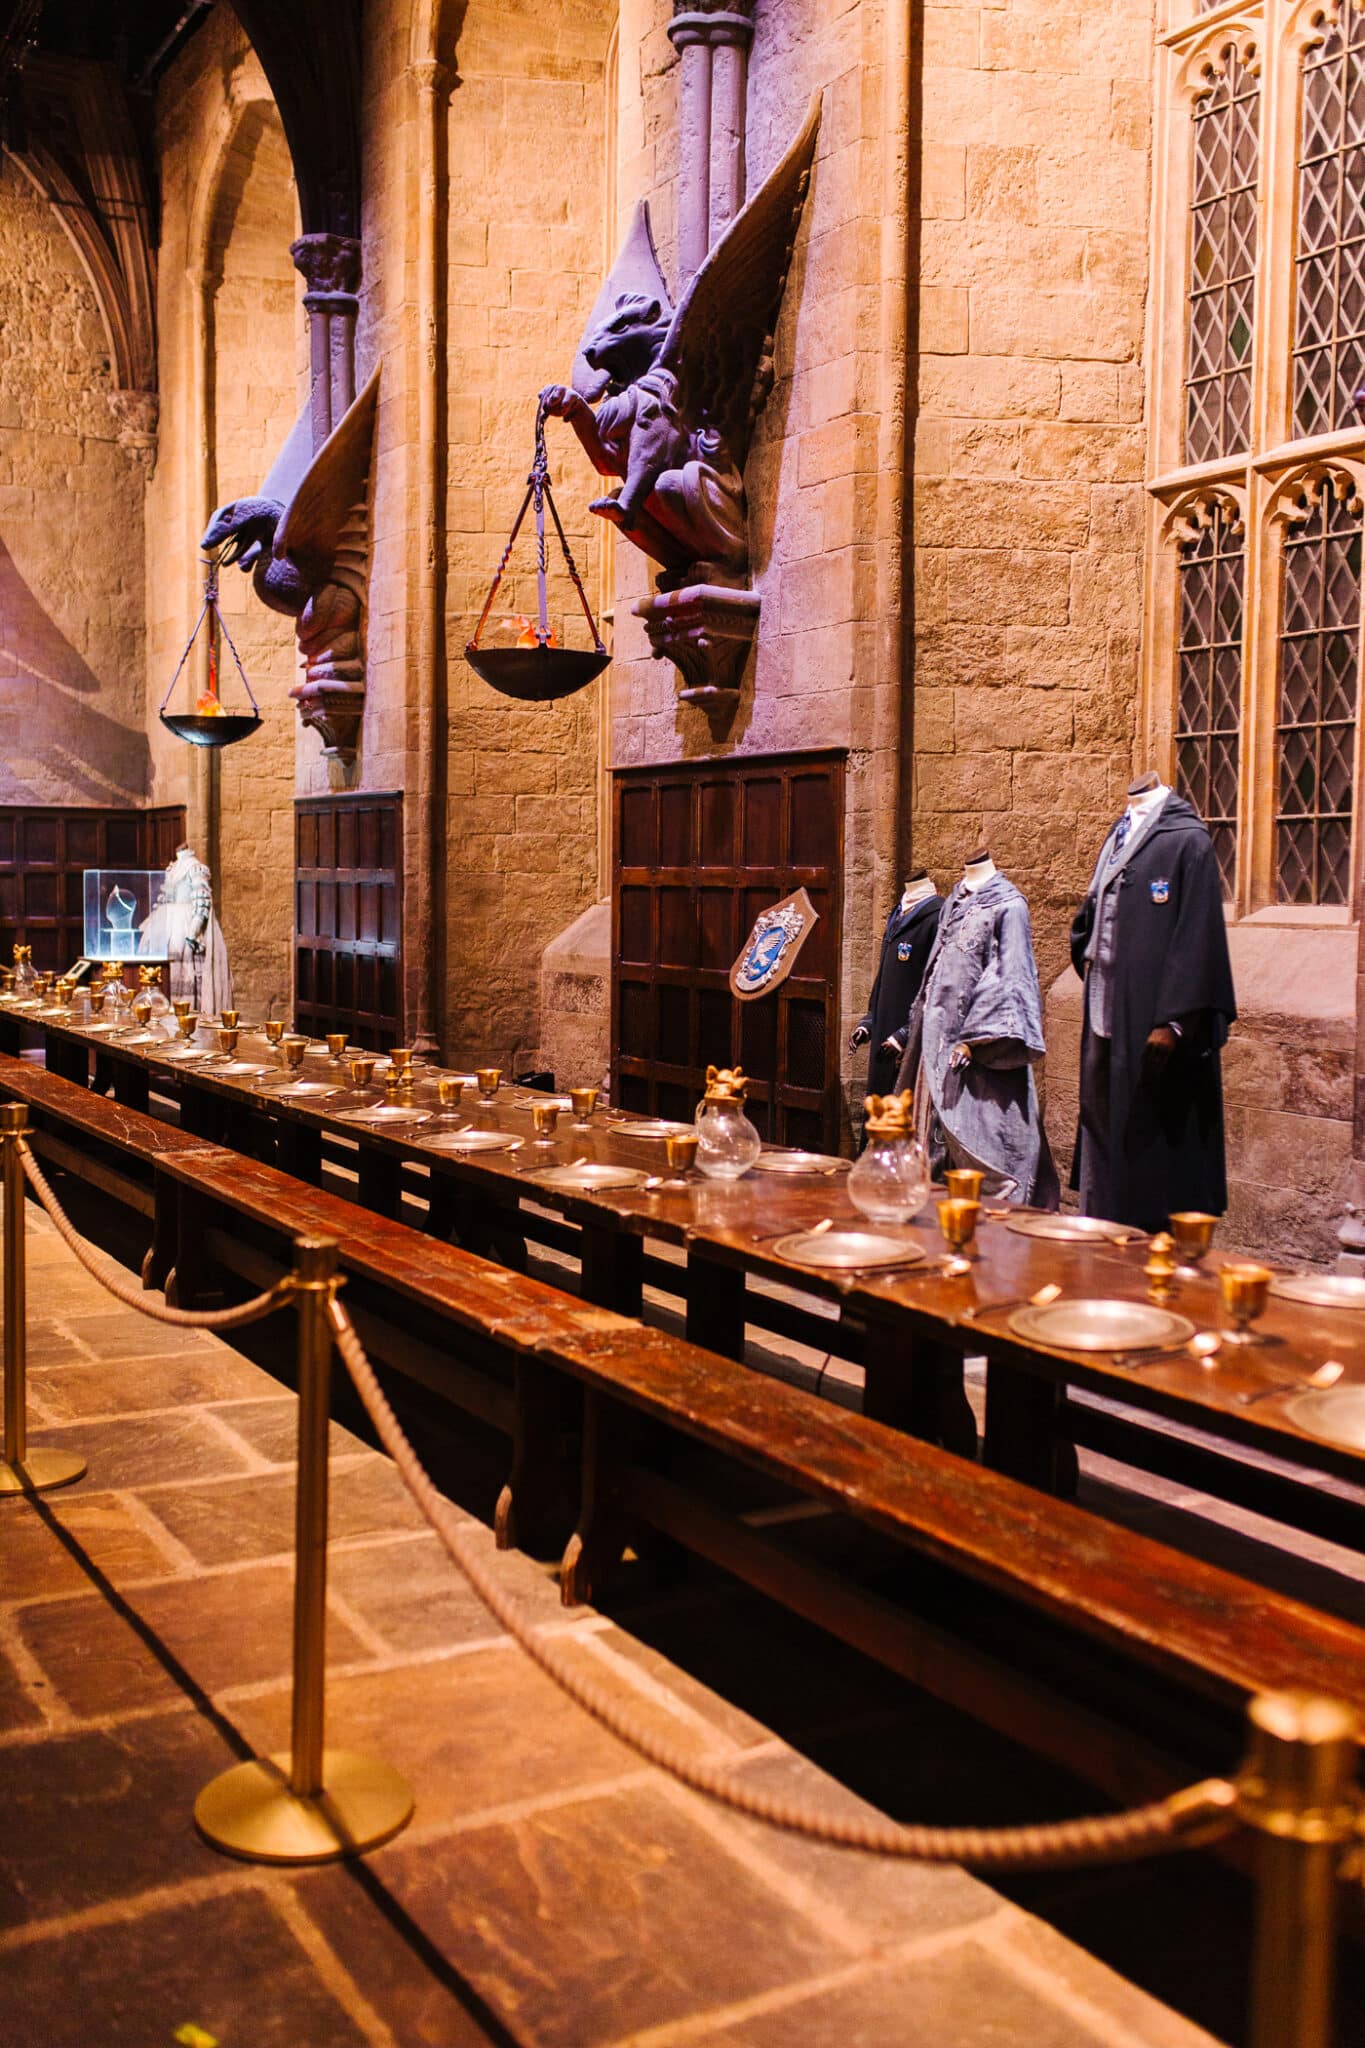 A full viwe of The Great Hall at Harry Potter Studios London. 